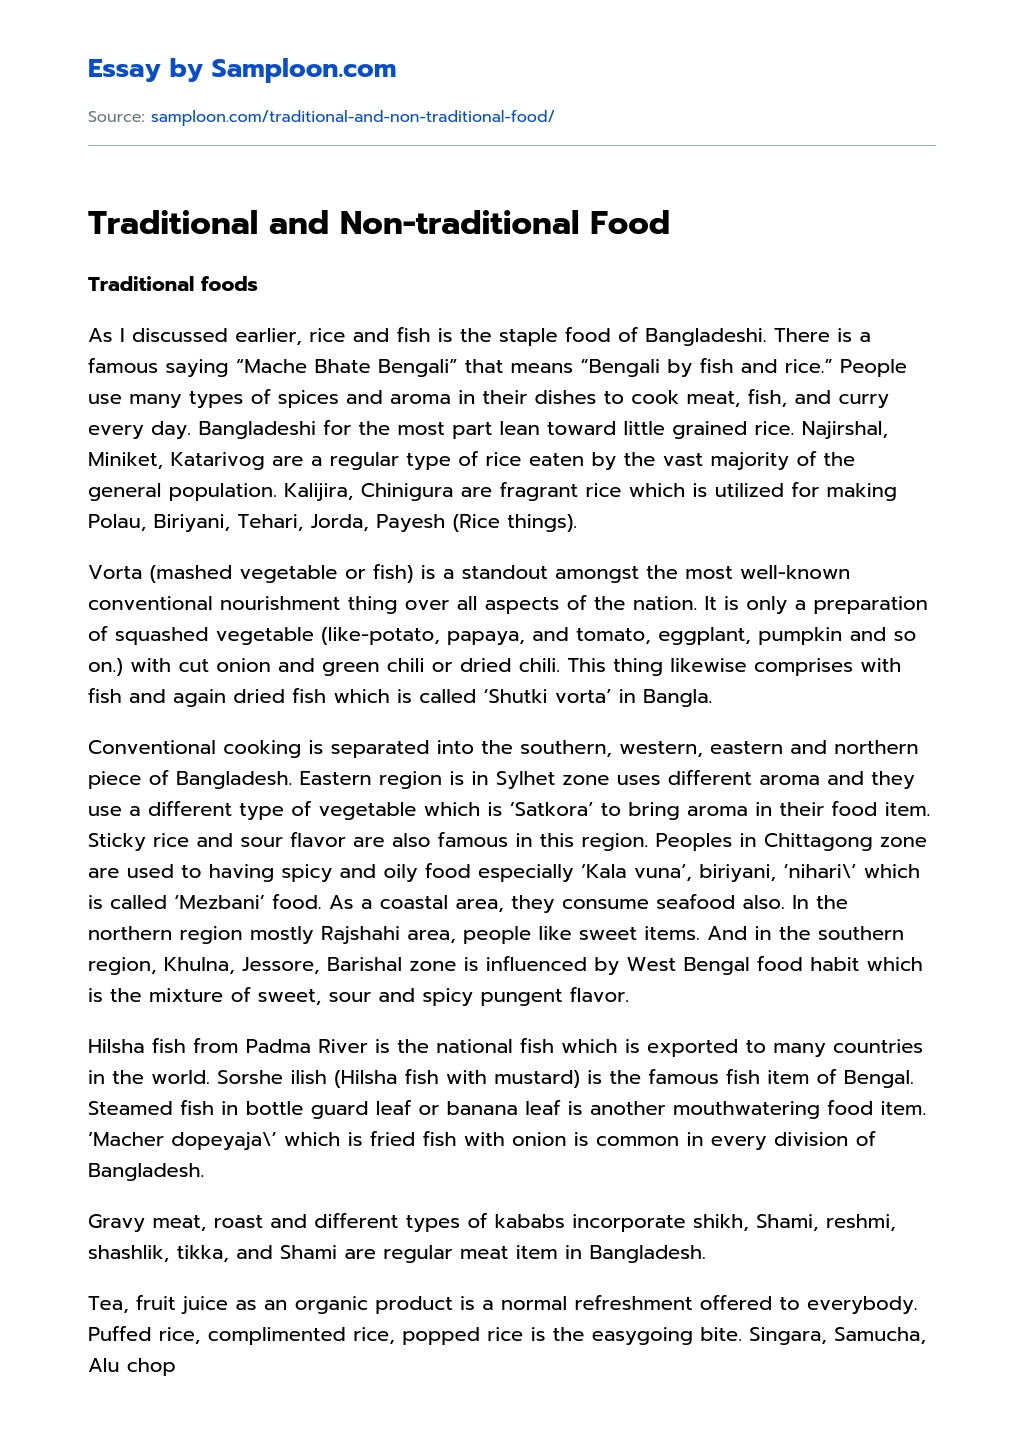 Traditional and Non-traditional Food Review essay